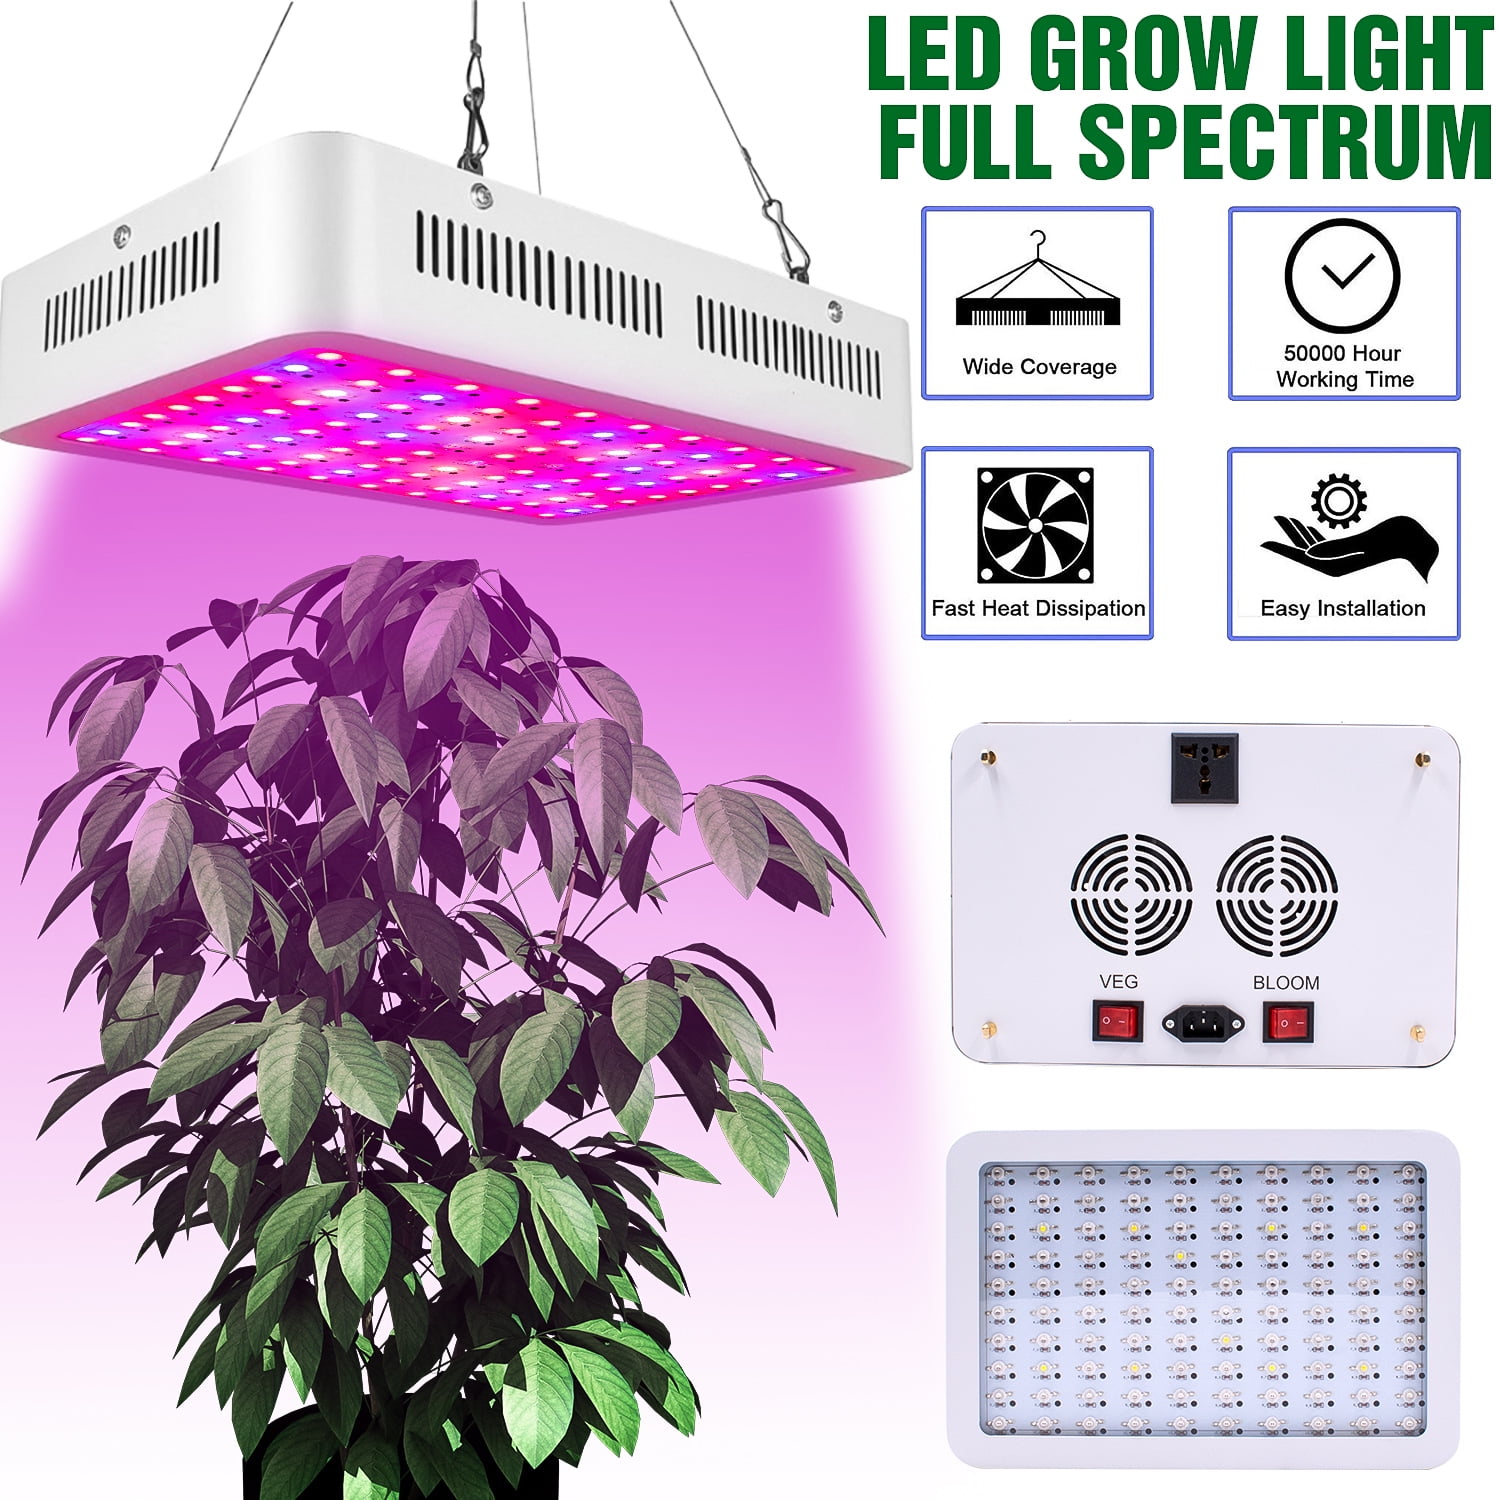 600W LED Grow Light Full Spectrum Panel Lamp With Rope Hanger for Indoor Plants 